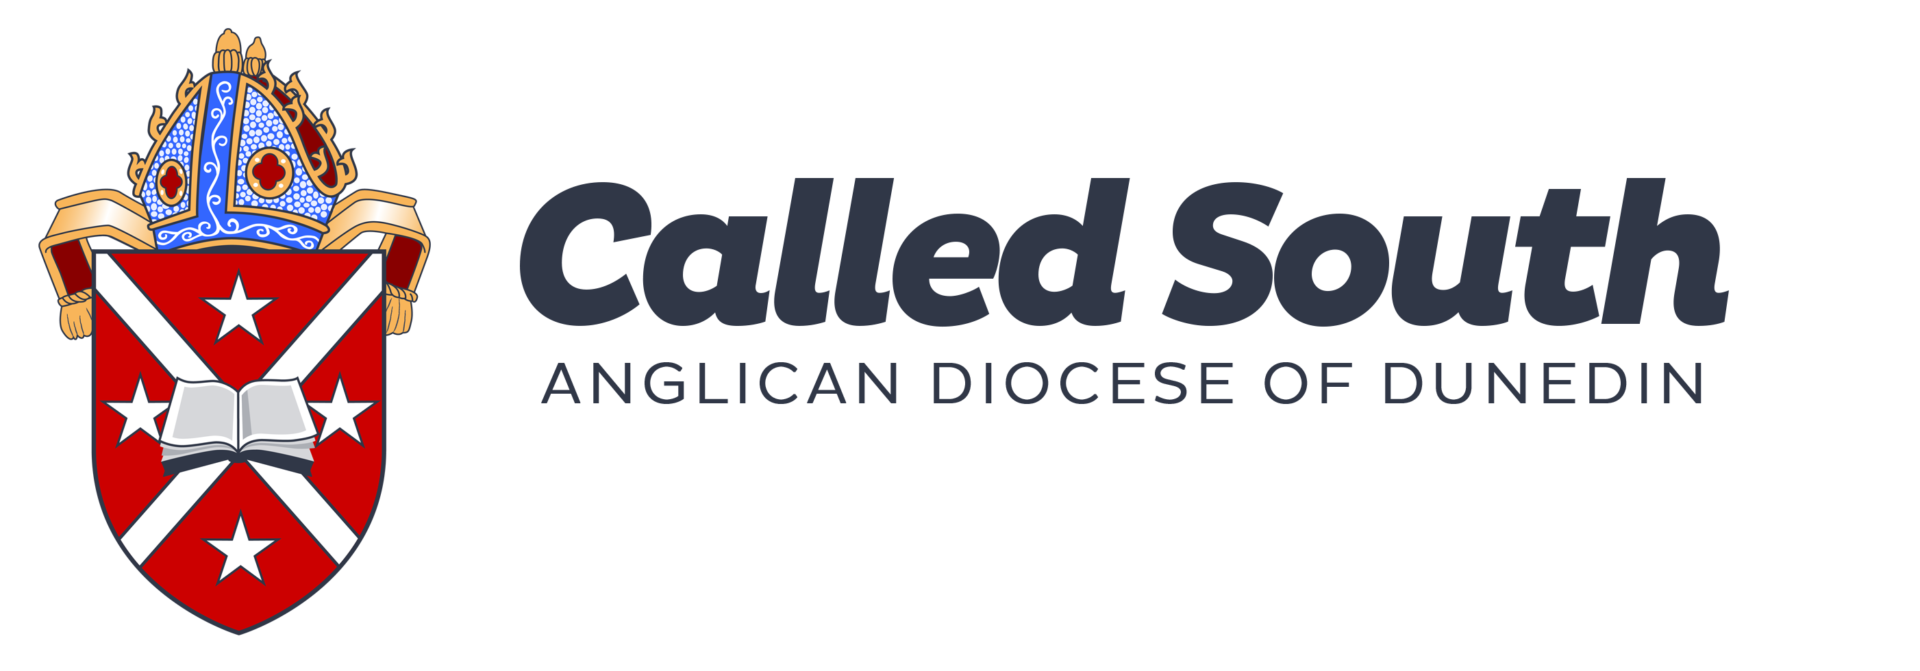 Anglican Diocese of Dunedin